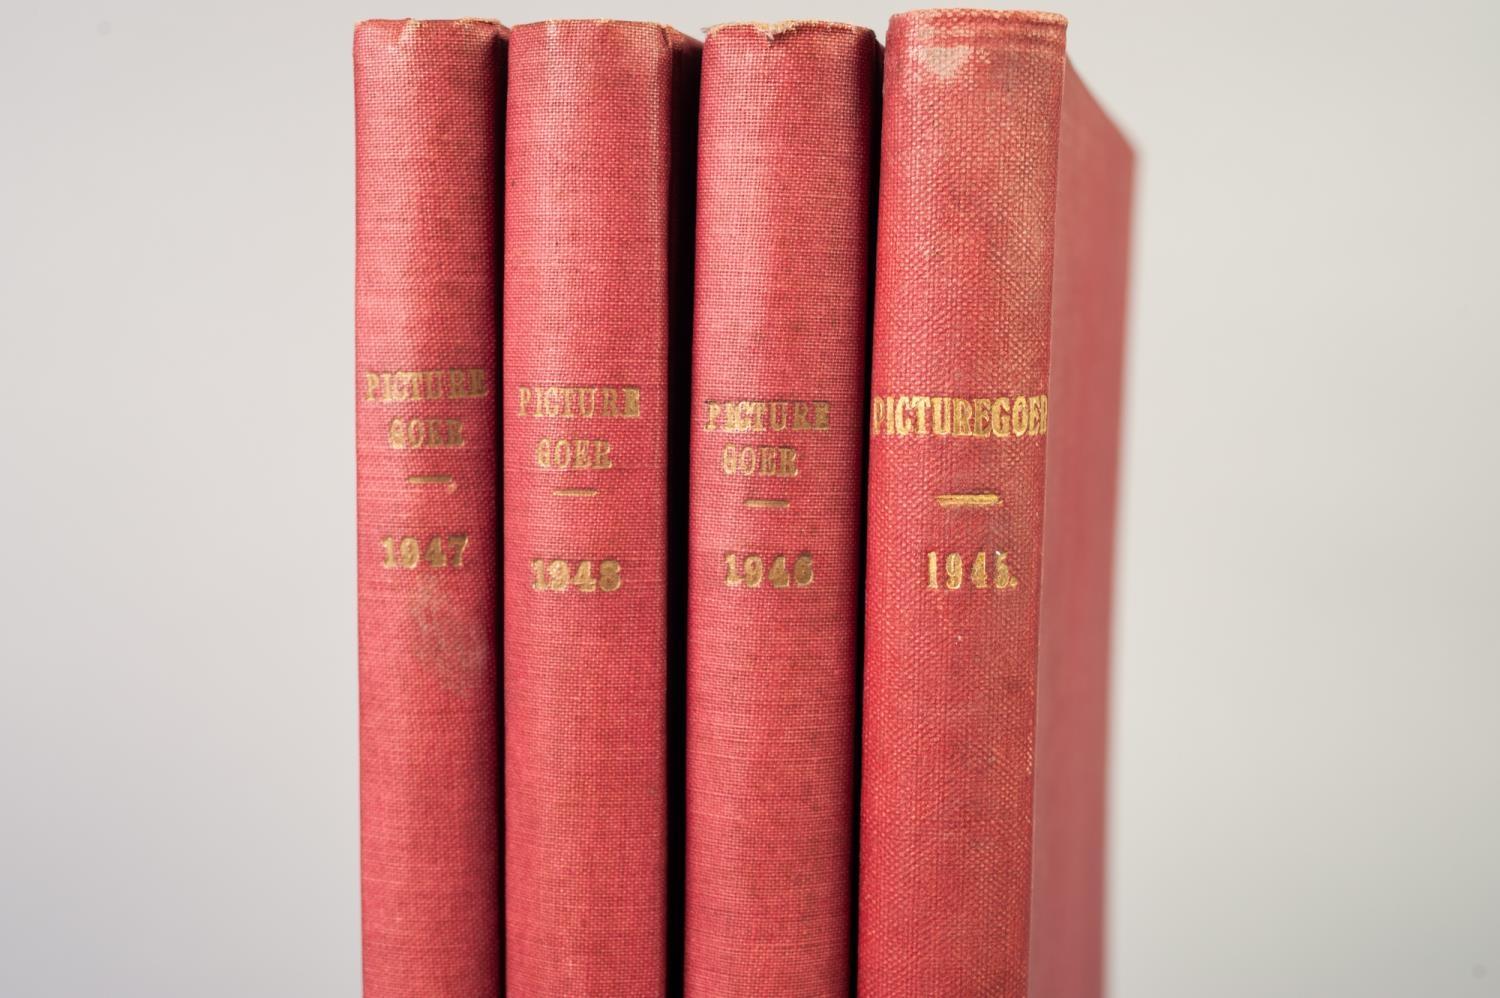 SMALL SELECTION OF PICTUREGOER ANNUALS, 1940s, bound in red cloth, 1945, 1946, 1947, 1948, various - Image 2 of 3